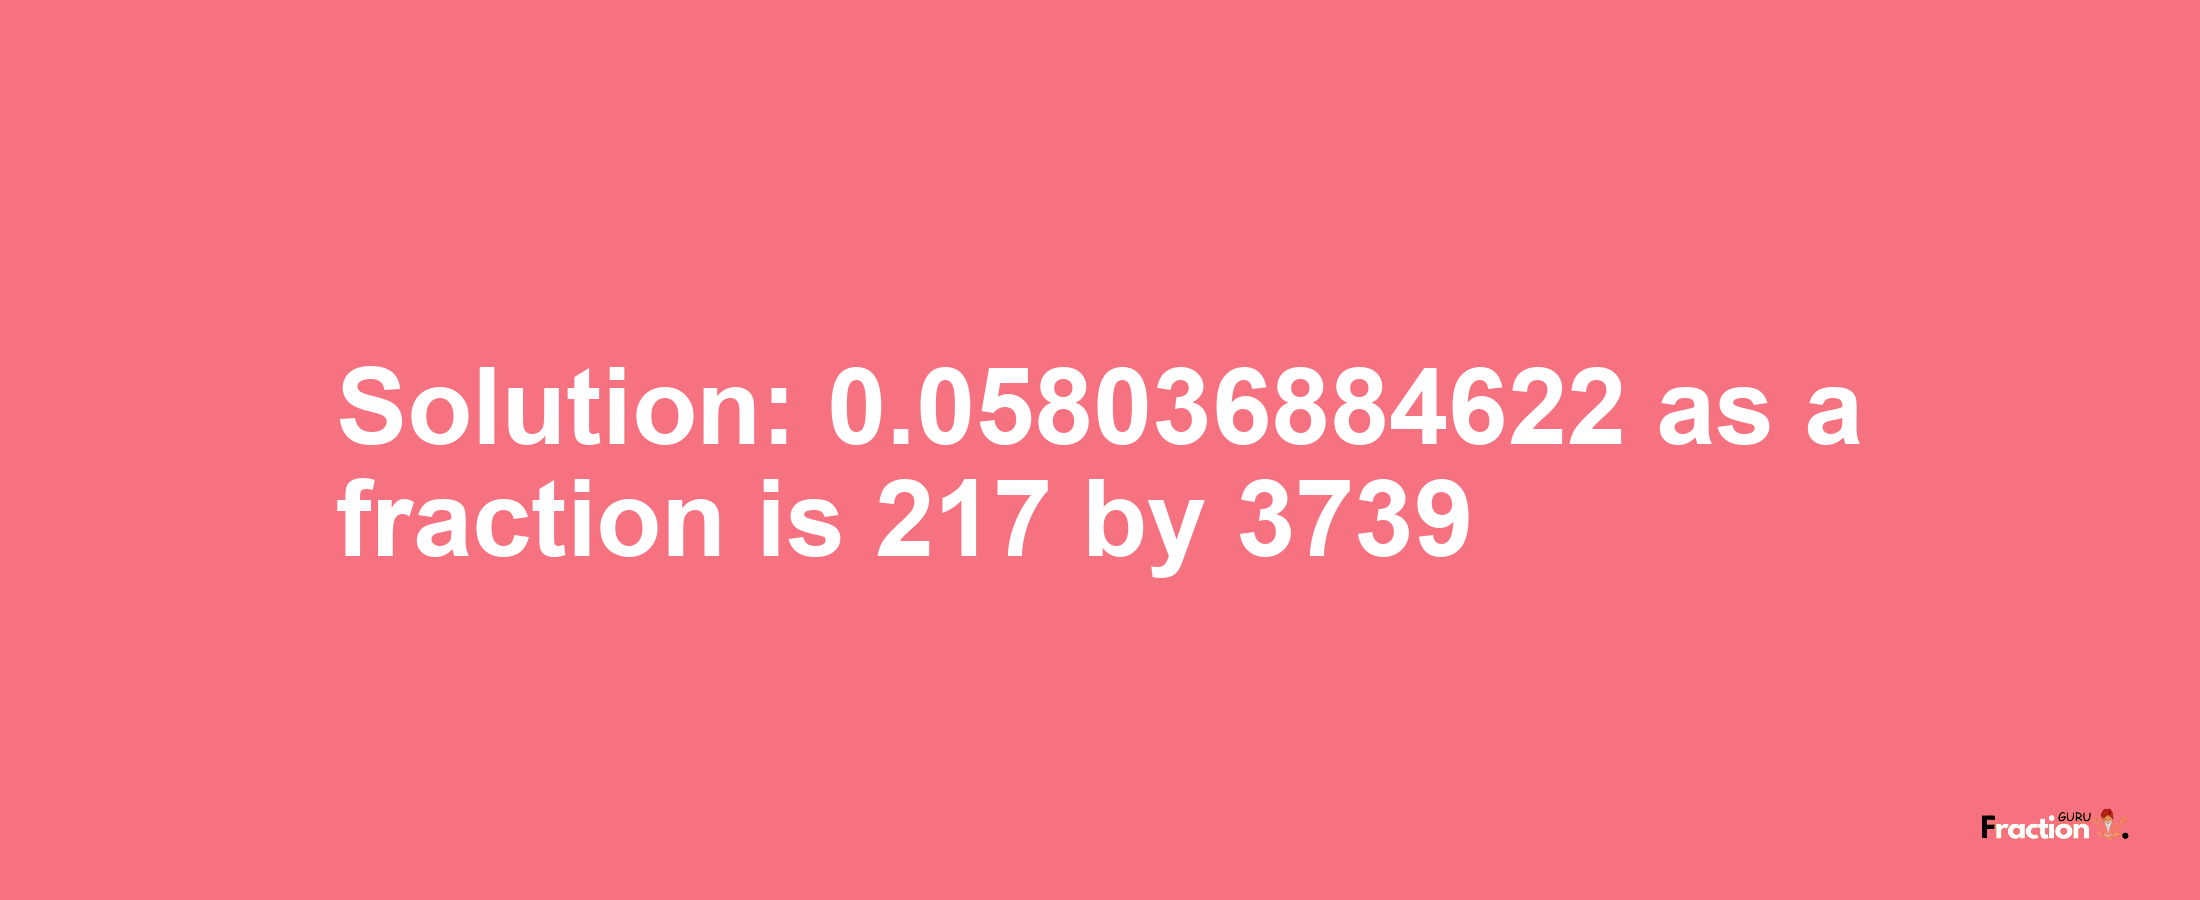 Solution:0.058036884622 as a fraction is 217/3739